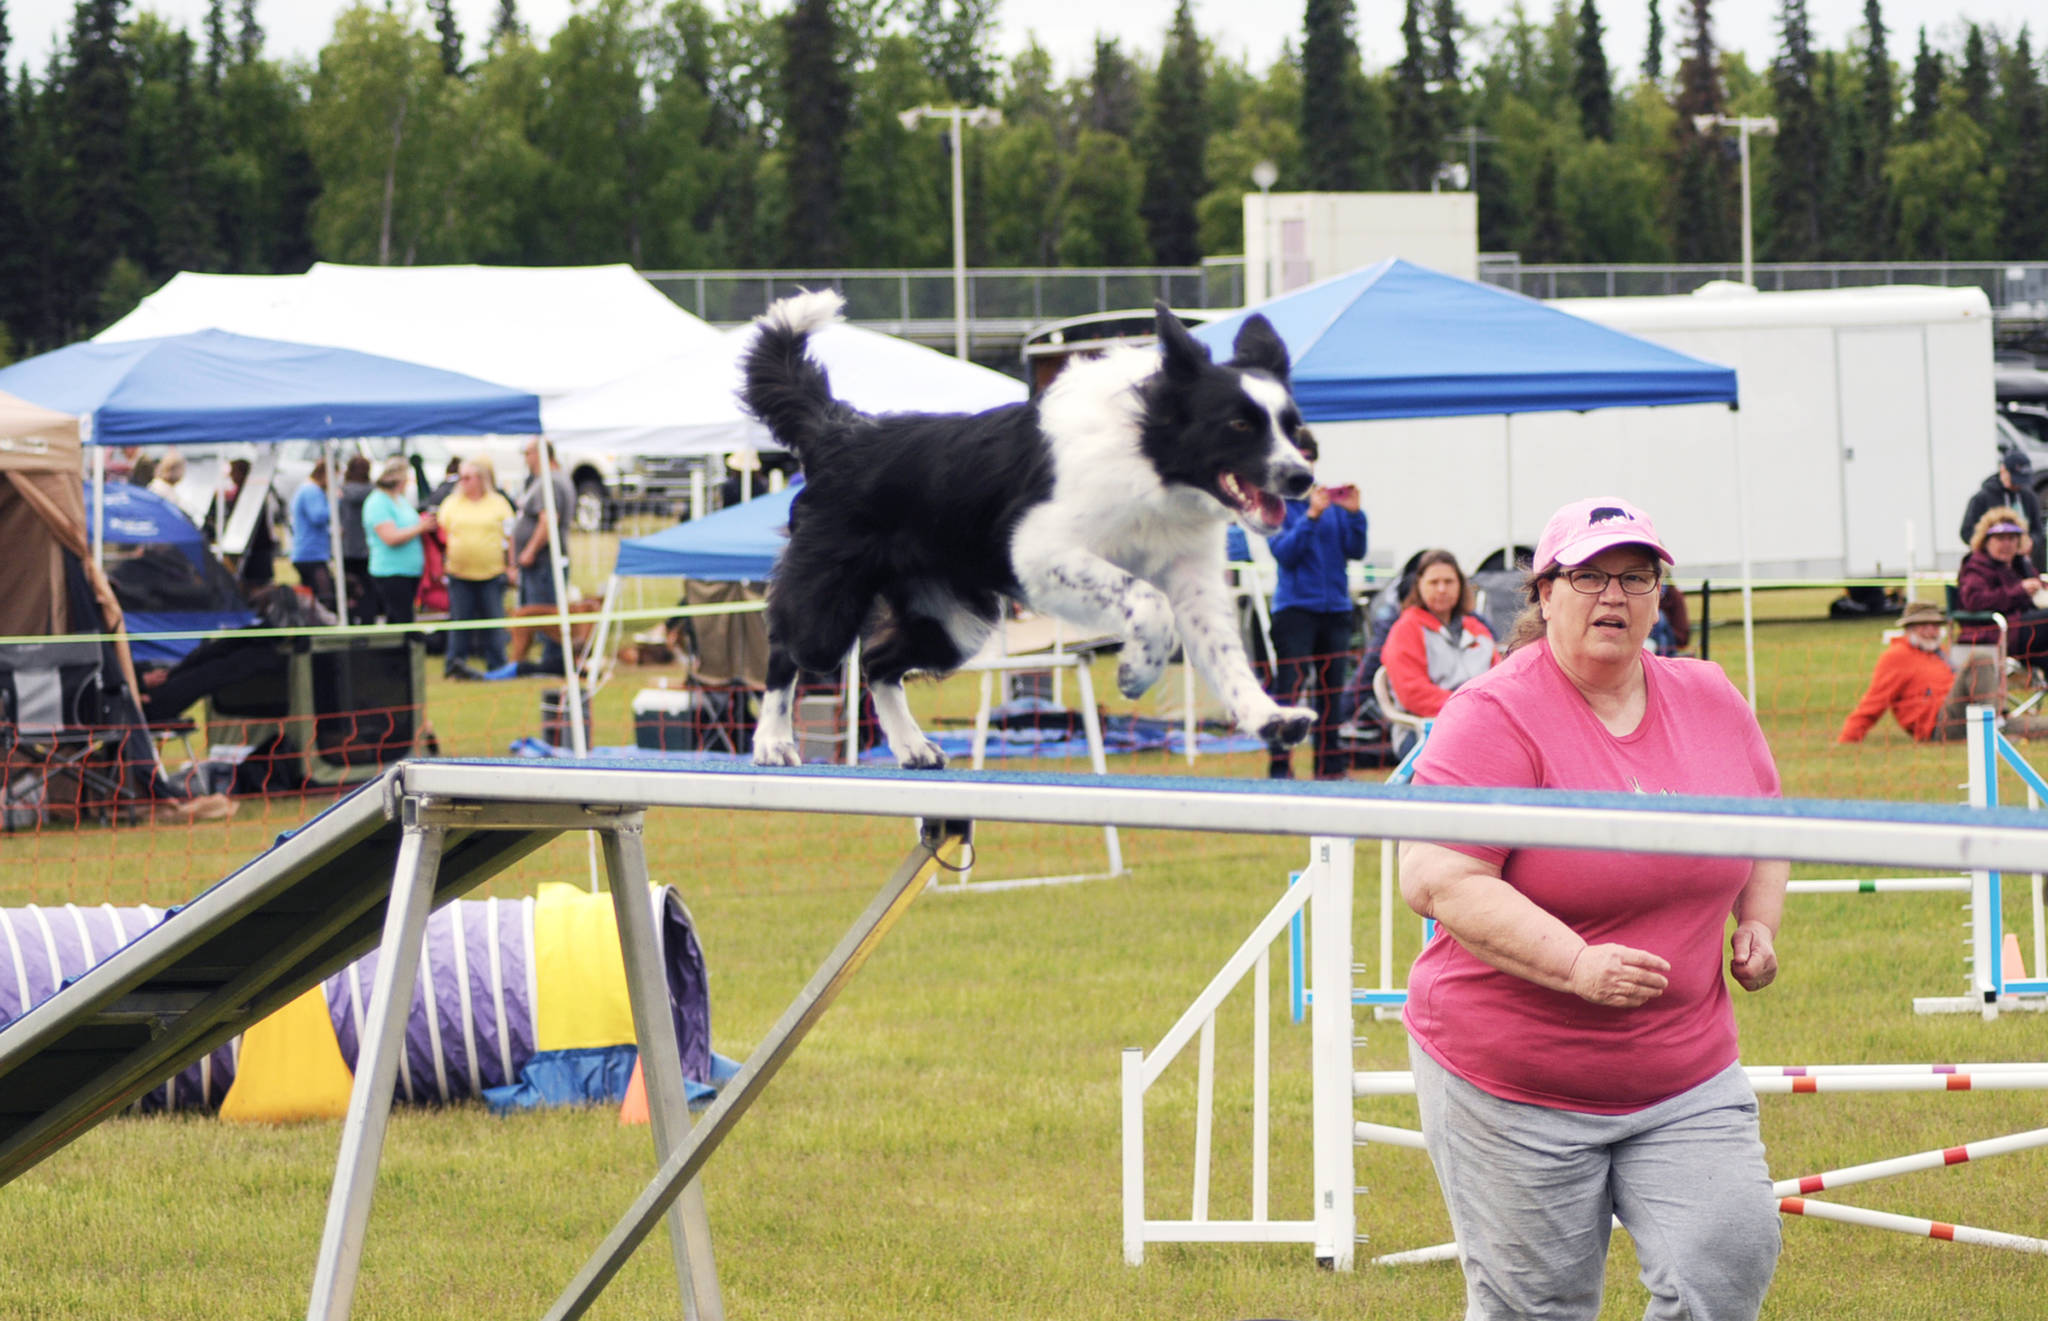 A dog dashes along a ramp during an agility test at the Kenai Kennel Club’s annual dog show, obedience and agility trials on Saturday, July 14, 2018 in Soldotna, Alaska. Dog owners come from all over the state to take part in the events each year. (Photo by Elizabeth Earl/Peninsula Clarion)